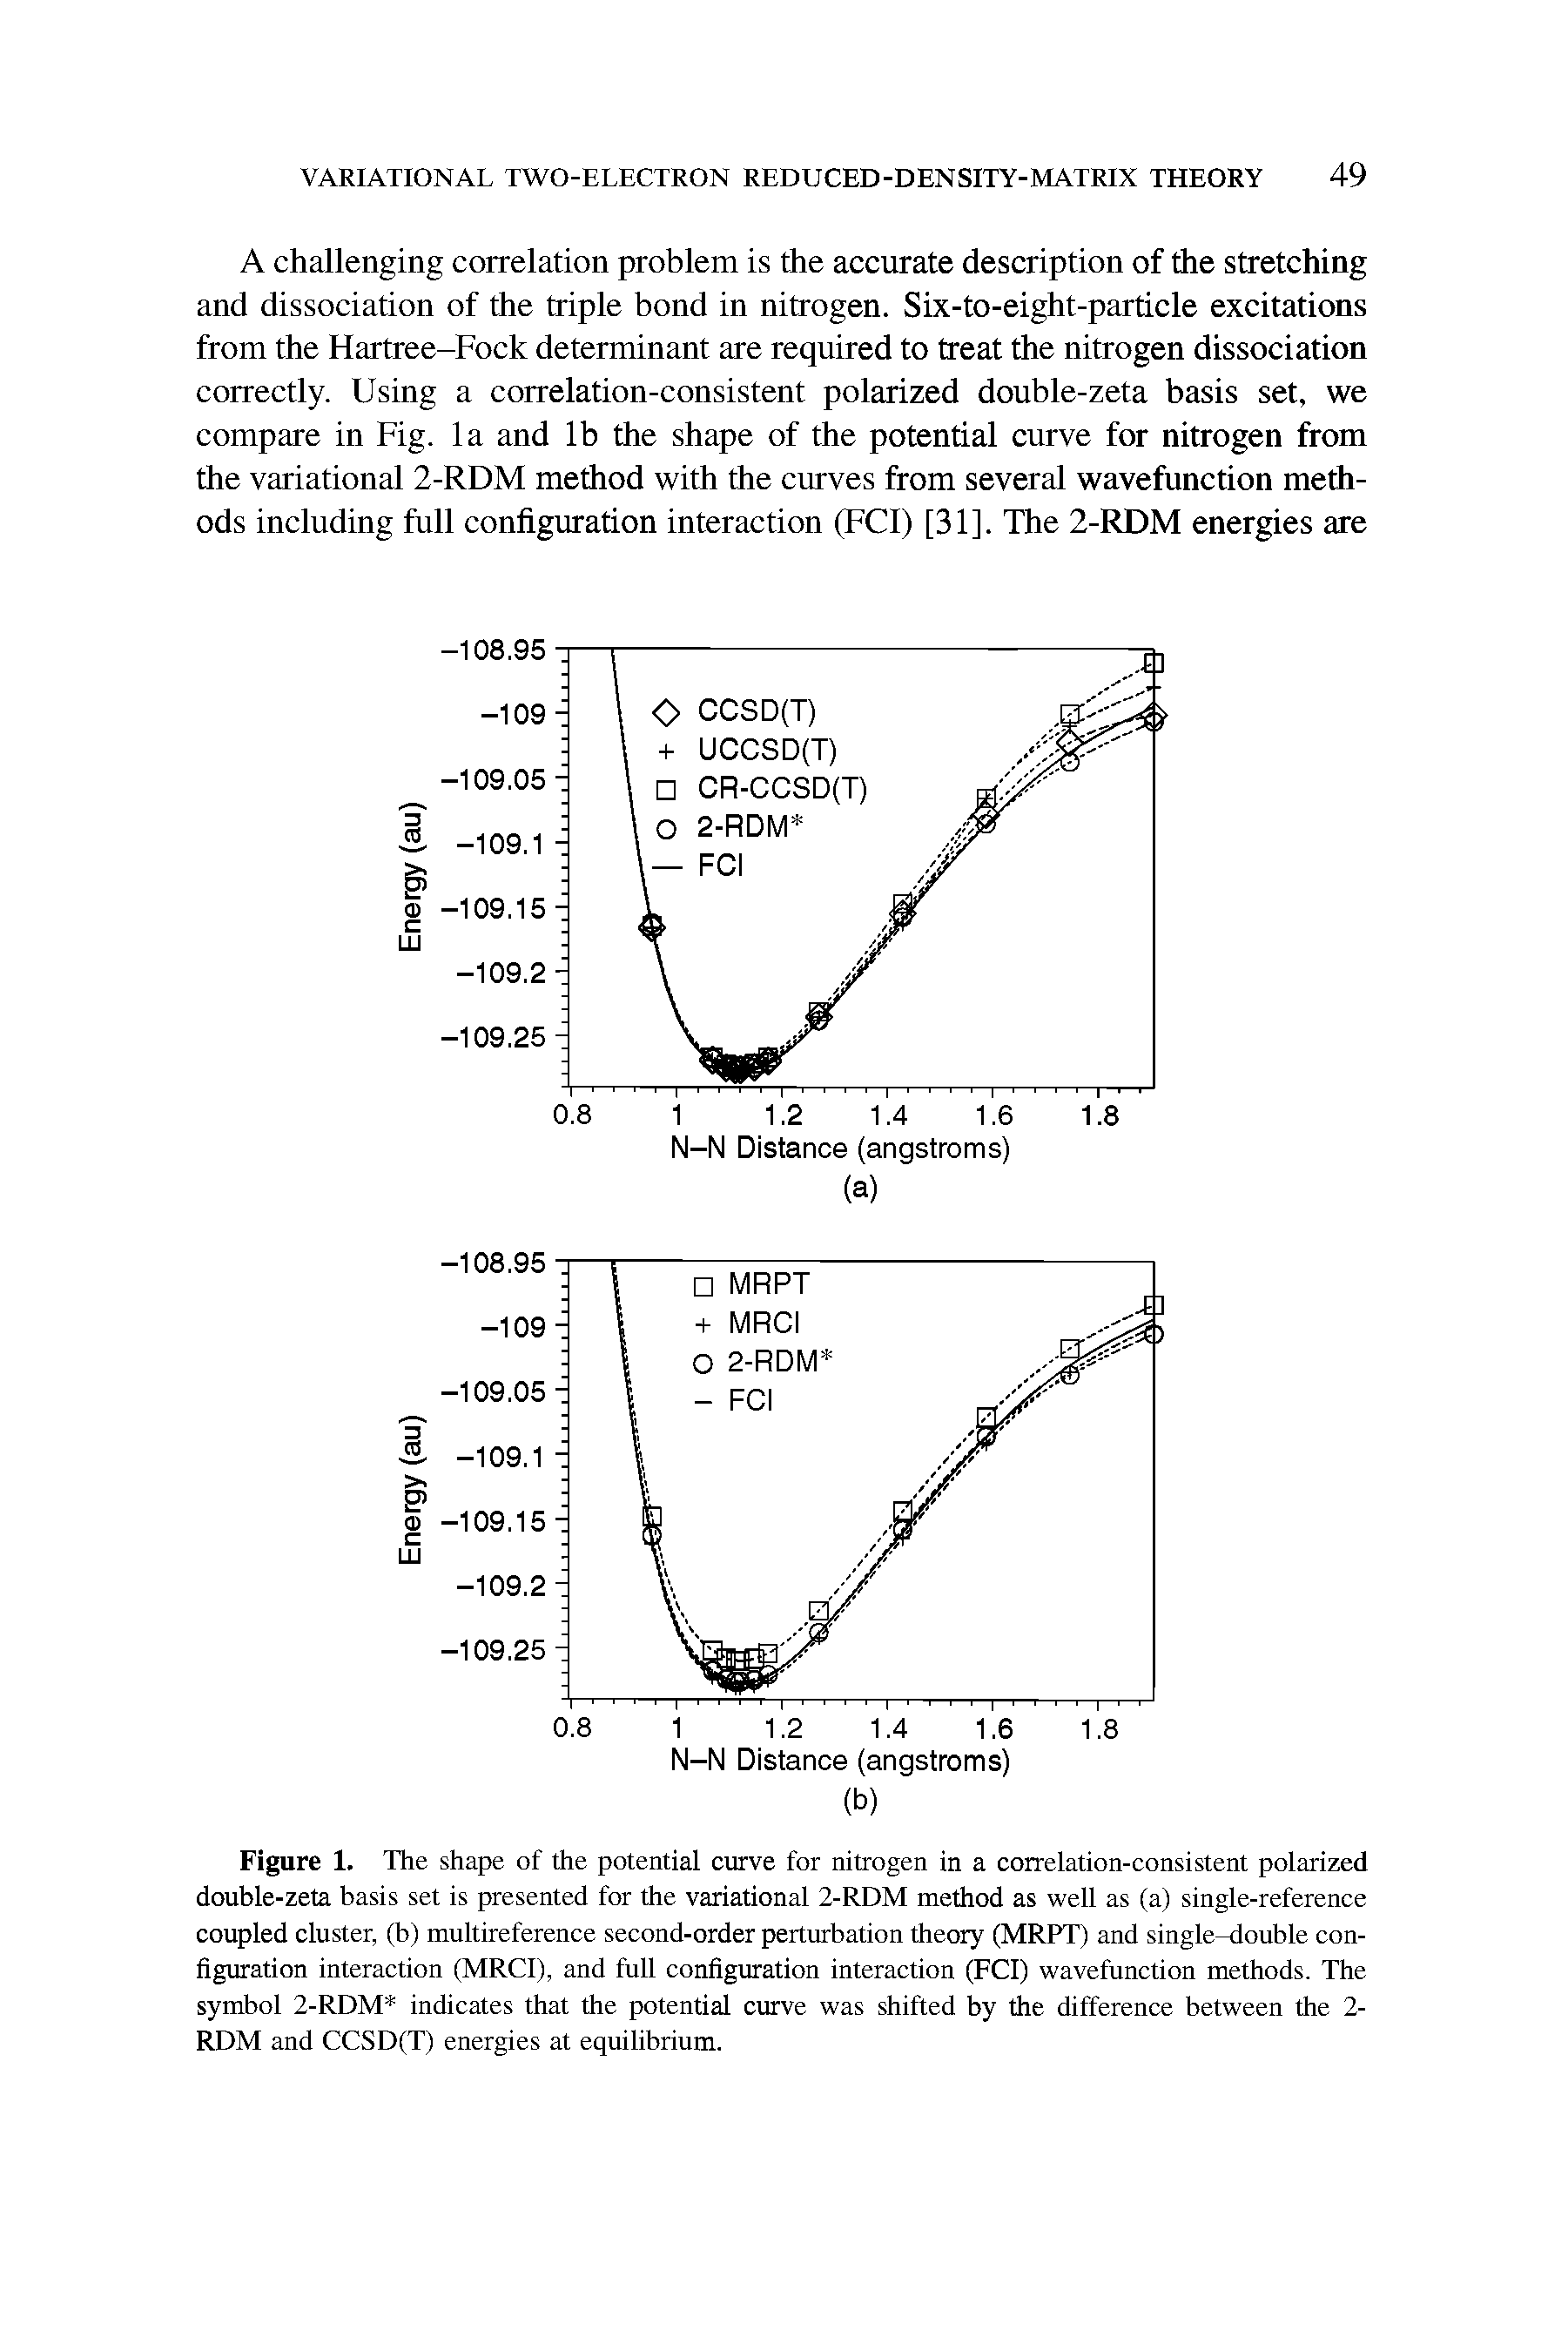 Figure 1. The shape of the potential curve for nitrogen in a correlation-consistent polarized double-zeta basis set is presented for the variational 2-RDM method as well as (a) single-reference coupled cluster, (b) multireference second-order perturbation theory (MRPT) and single-double configuration interaction (MRCl), and full configuration interaction (FCl) wavefunction methods. The symbol 2-RDM indicates that the potential curve was shifted by the difference between the 2-RDM and CCSD(T) energies at equilibrium.